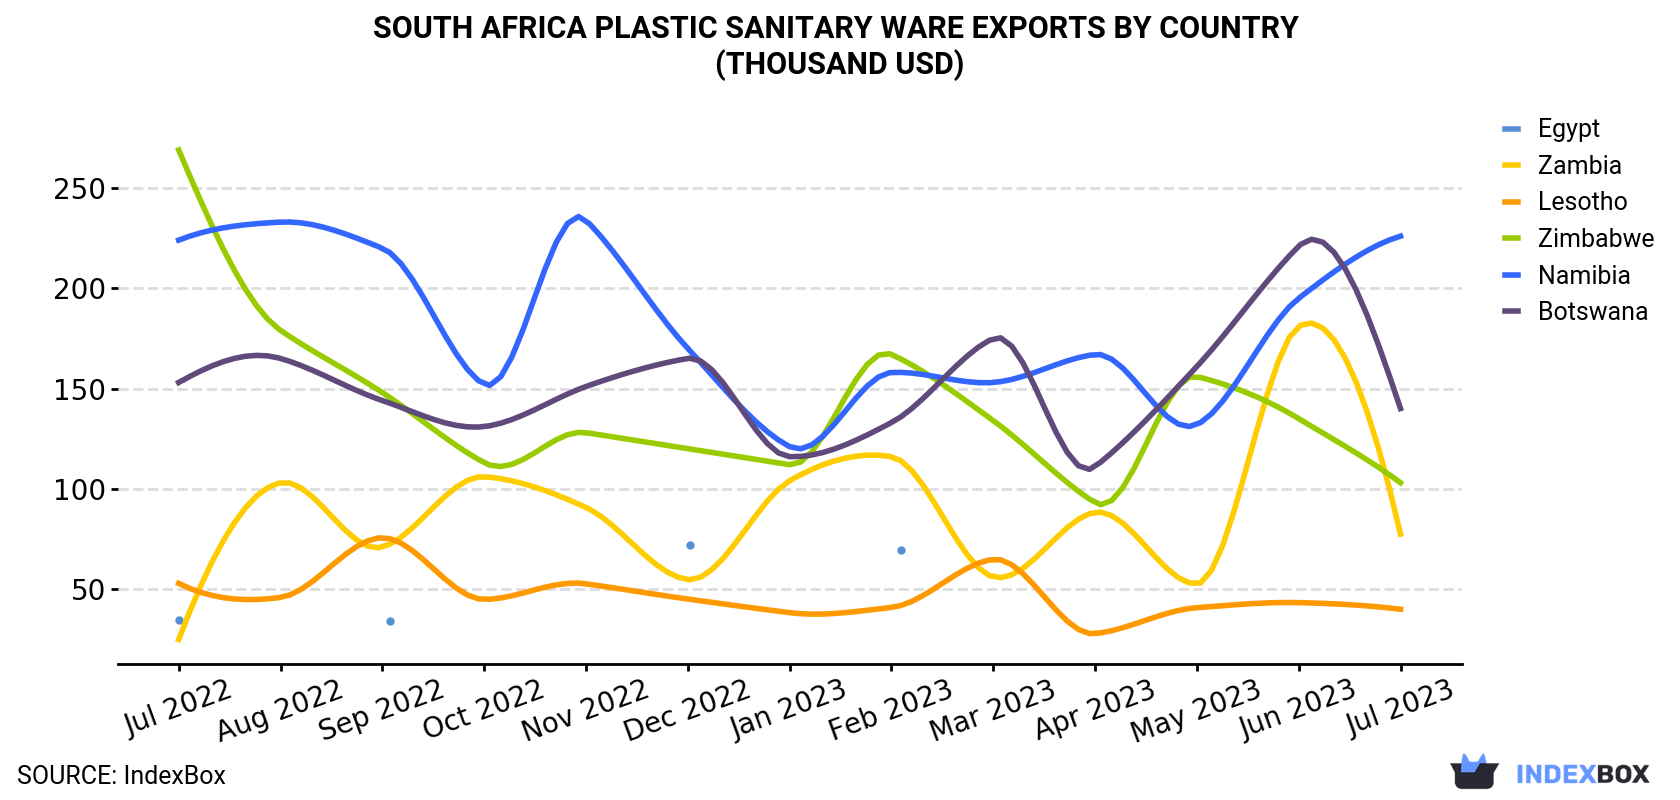 South Africa Plastic Sanitary Ware Exports By Country (Thousand USD)